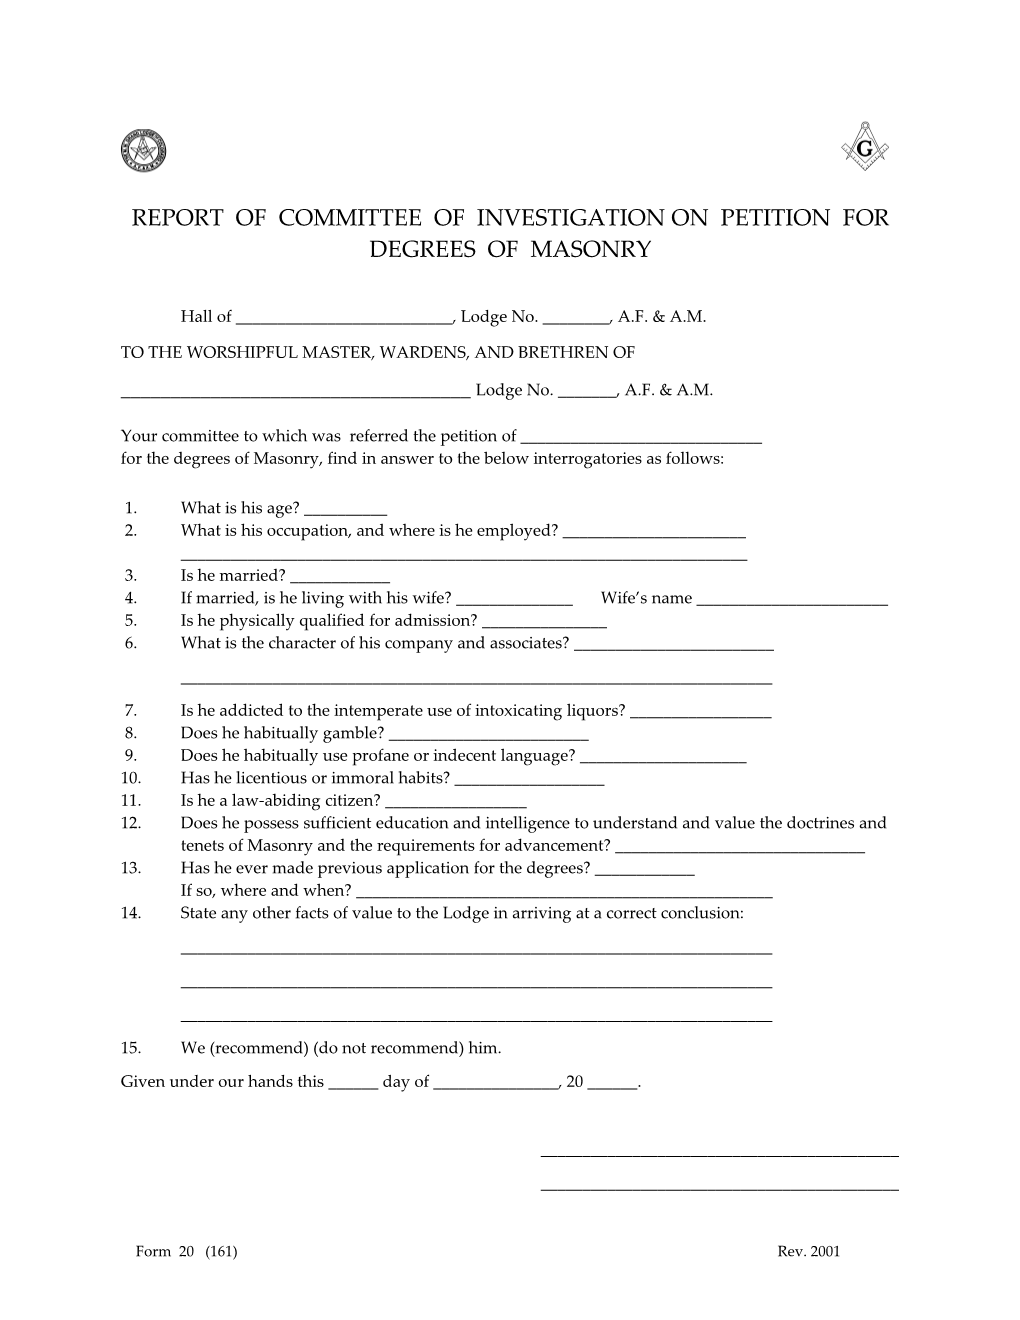 Report of Committee of Investigation on Petition For